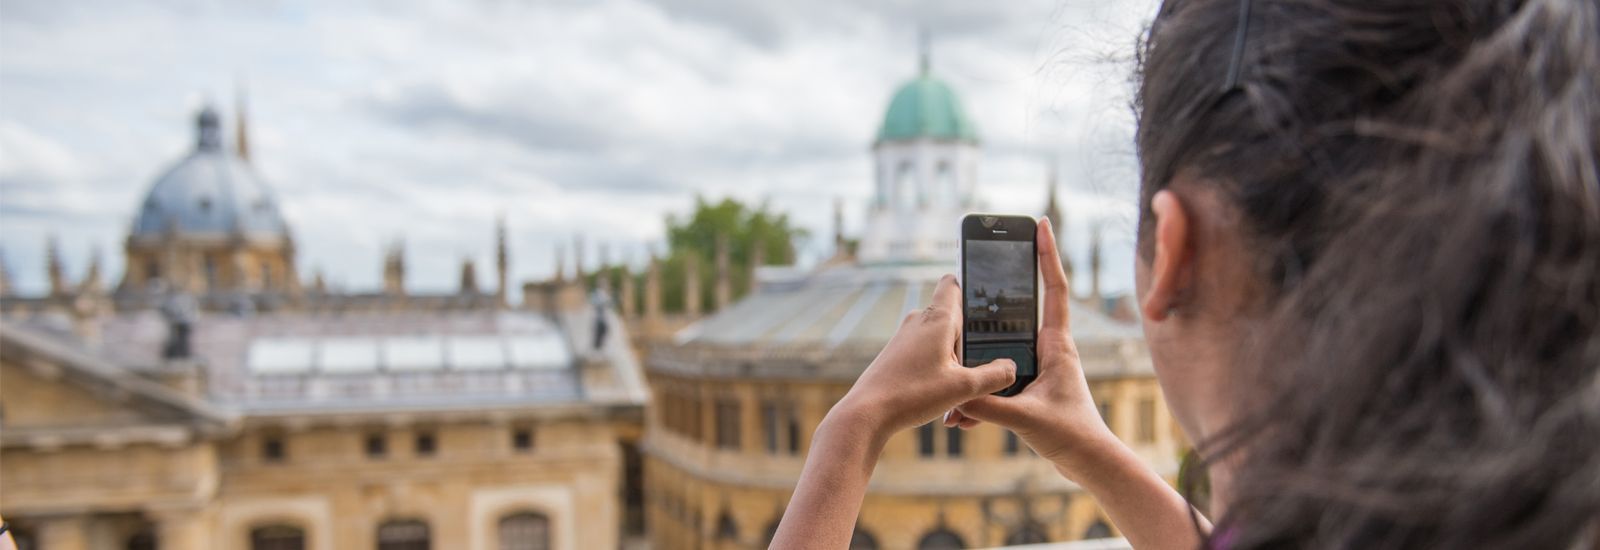 Visitor taking a photo of Oxford skyline on phone